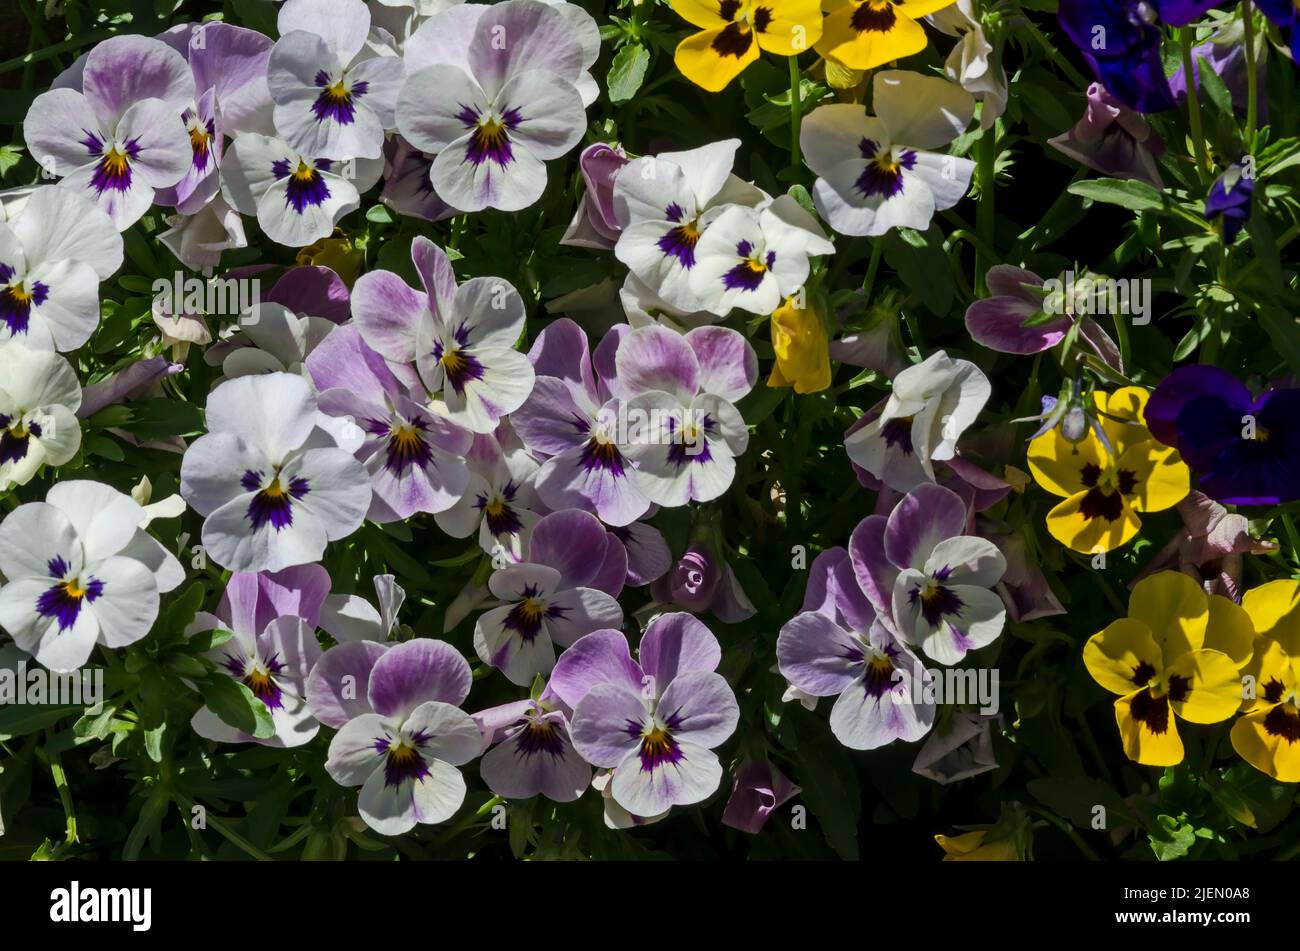 Mixture of purple, yellow, pink and white violets, Altai violet or purple flower, Sofia, Bulgaria Stock Photo